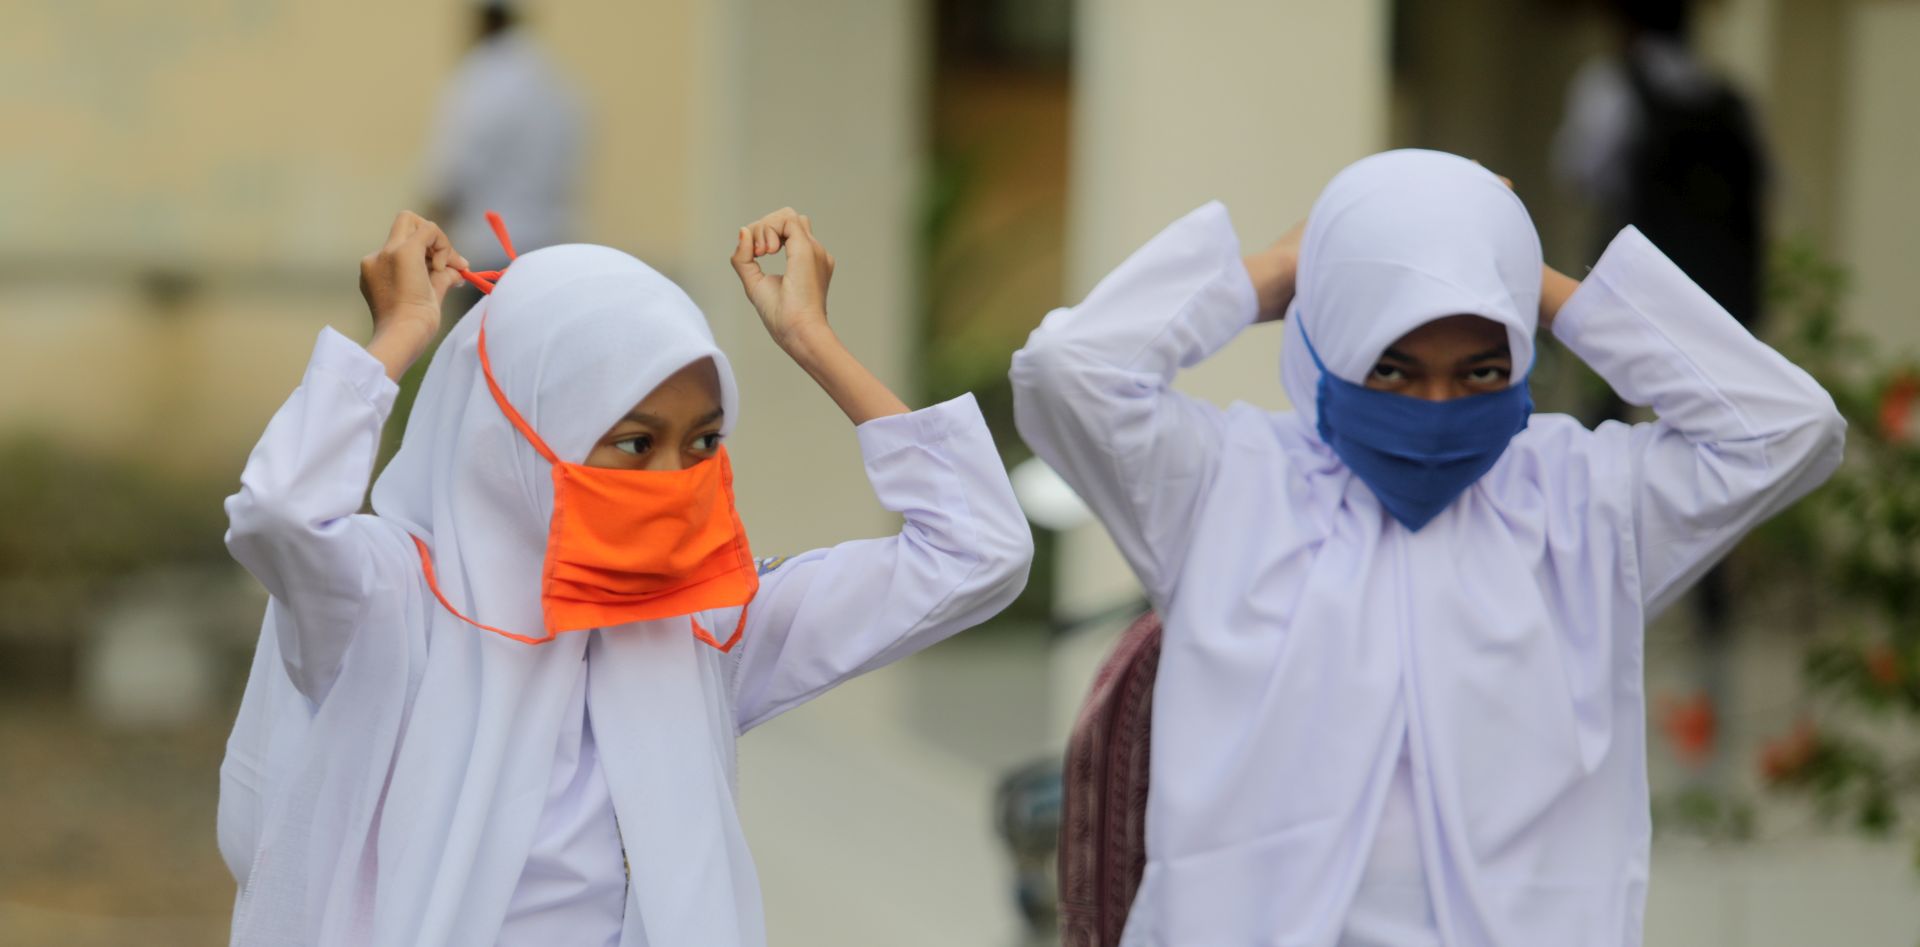 epa08542840 Students put on masks during the first day of school in Sibreh, Aceh, Indonesia, 13 July 2020. The Indonesian government began to reopen some schools in low-risk areas. The online learning method is still enforced in several other areas. The government has started to ease COVID-19 lockdown restrictions in an effort to restart the economy after more than three months of disruption caused by the ongoing pandemic.  EPA/HOTLI SIMANJUNTAK